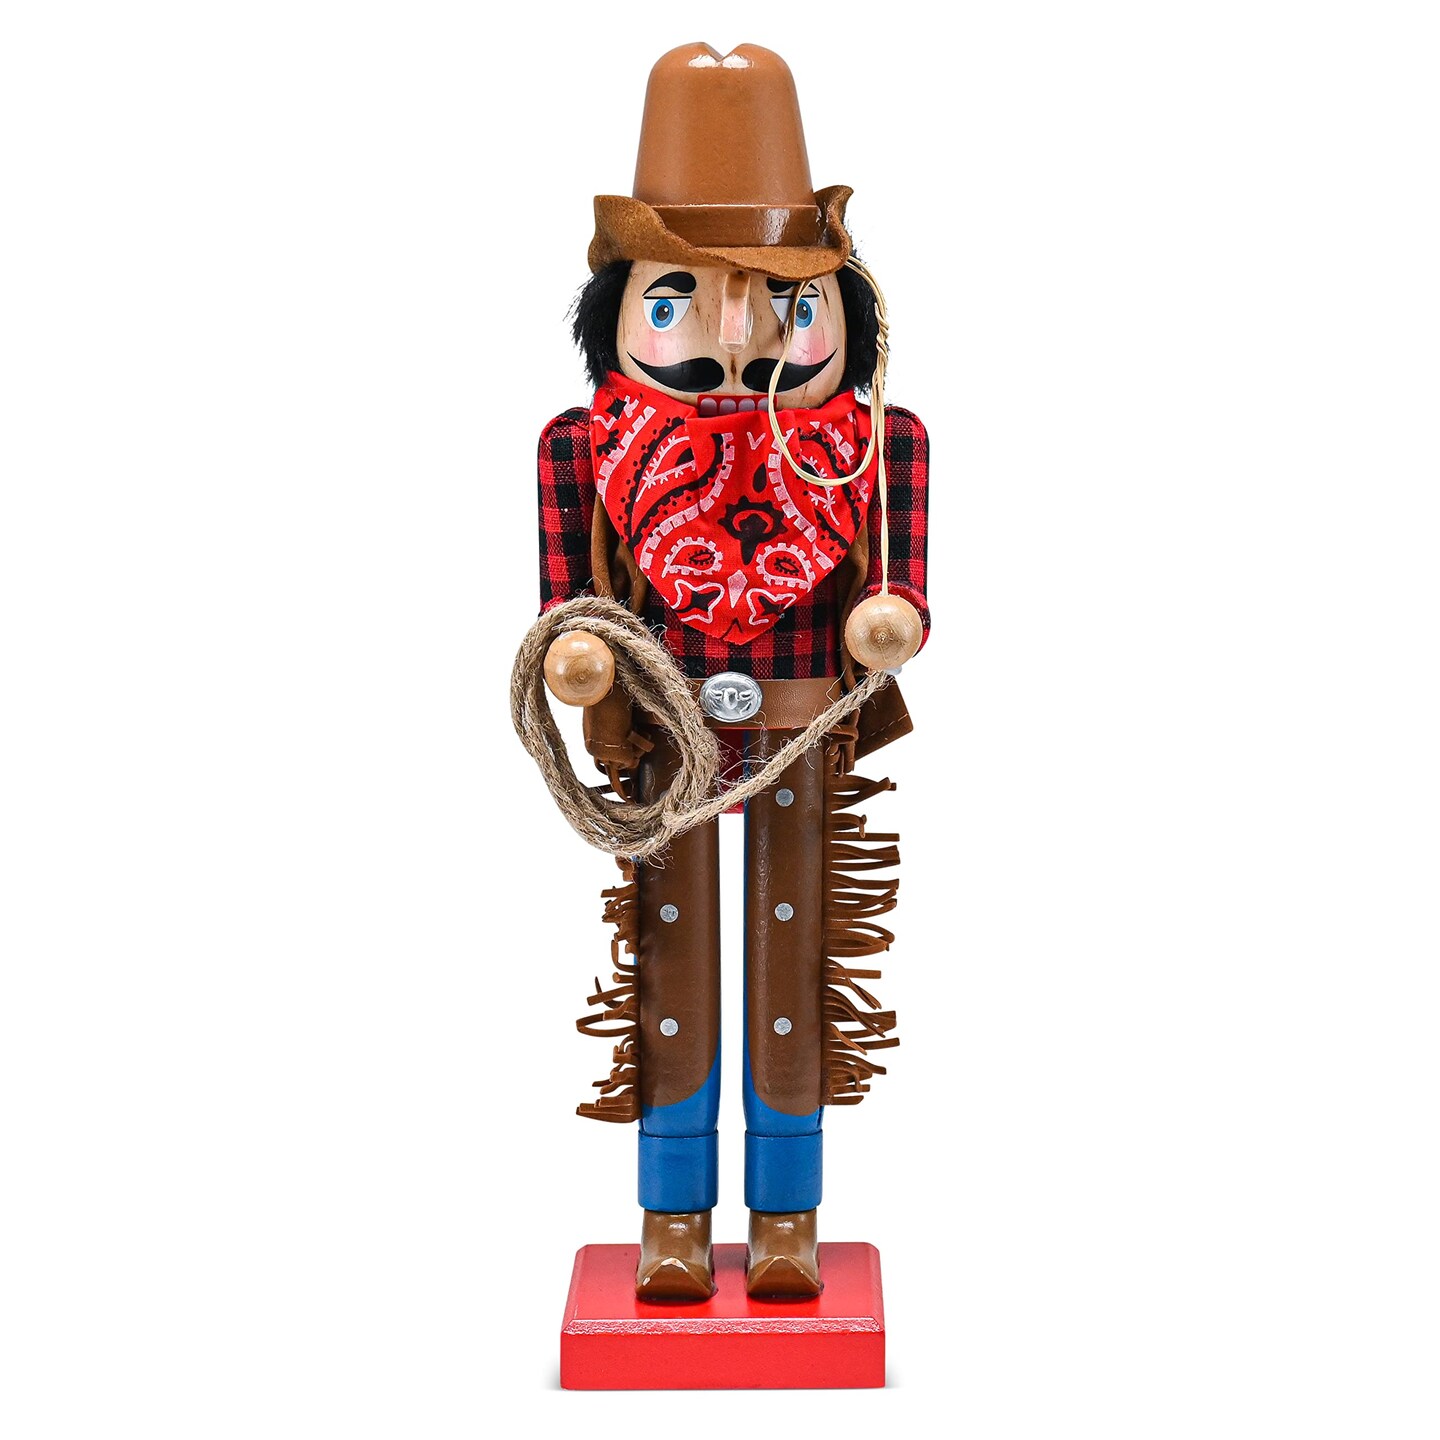 Ornativity Christmas Western Cowboy Nutcracker &#x2013; Brown and Red Wooden Nutcracker Cow Boy with a Rope and Lasso Xmas Themed Holiday Nut Cracker Doll Figure Decorations